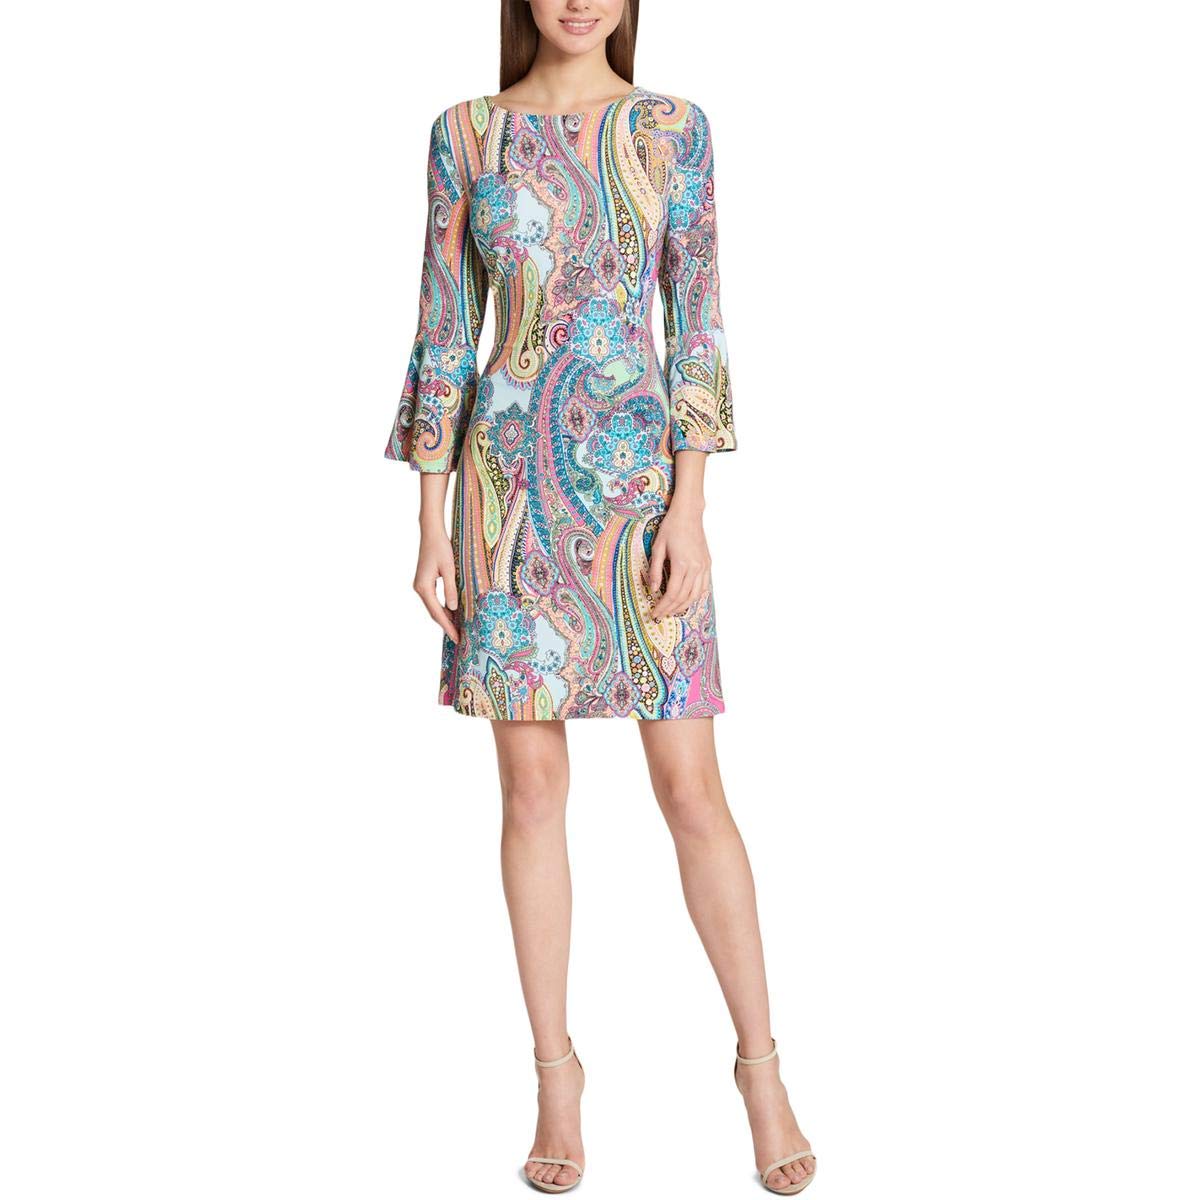 Tommy Hilfiger Women's Round Neck Printed Bell Sleeve Dress